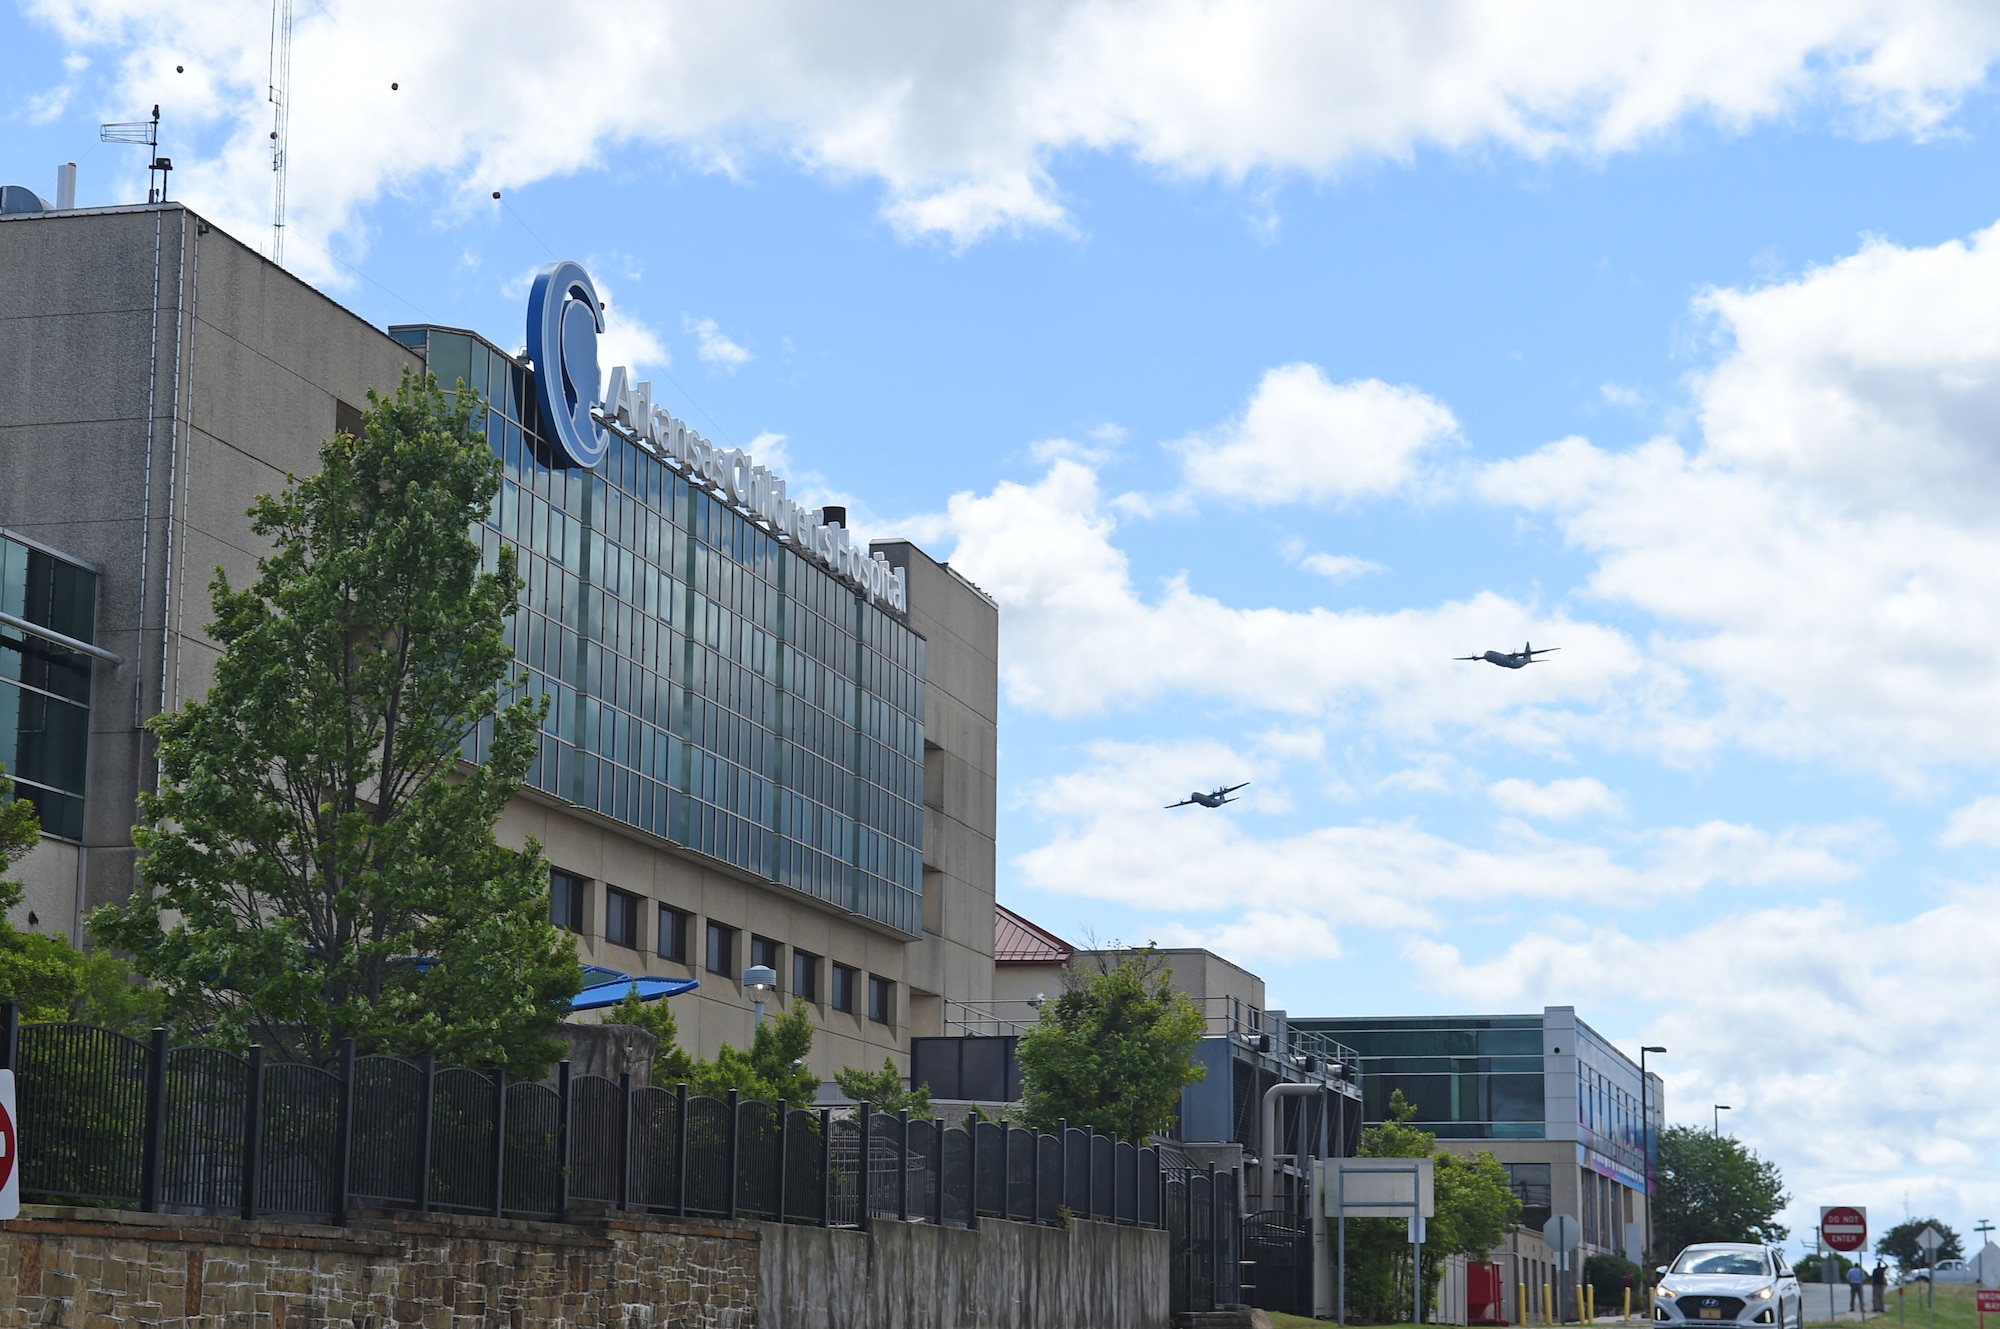 Spectators watch as two C-130s fly over the city